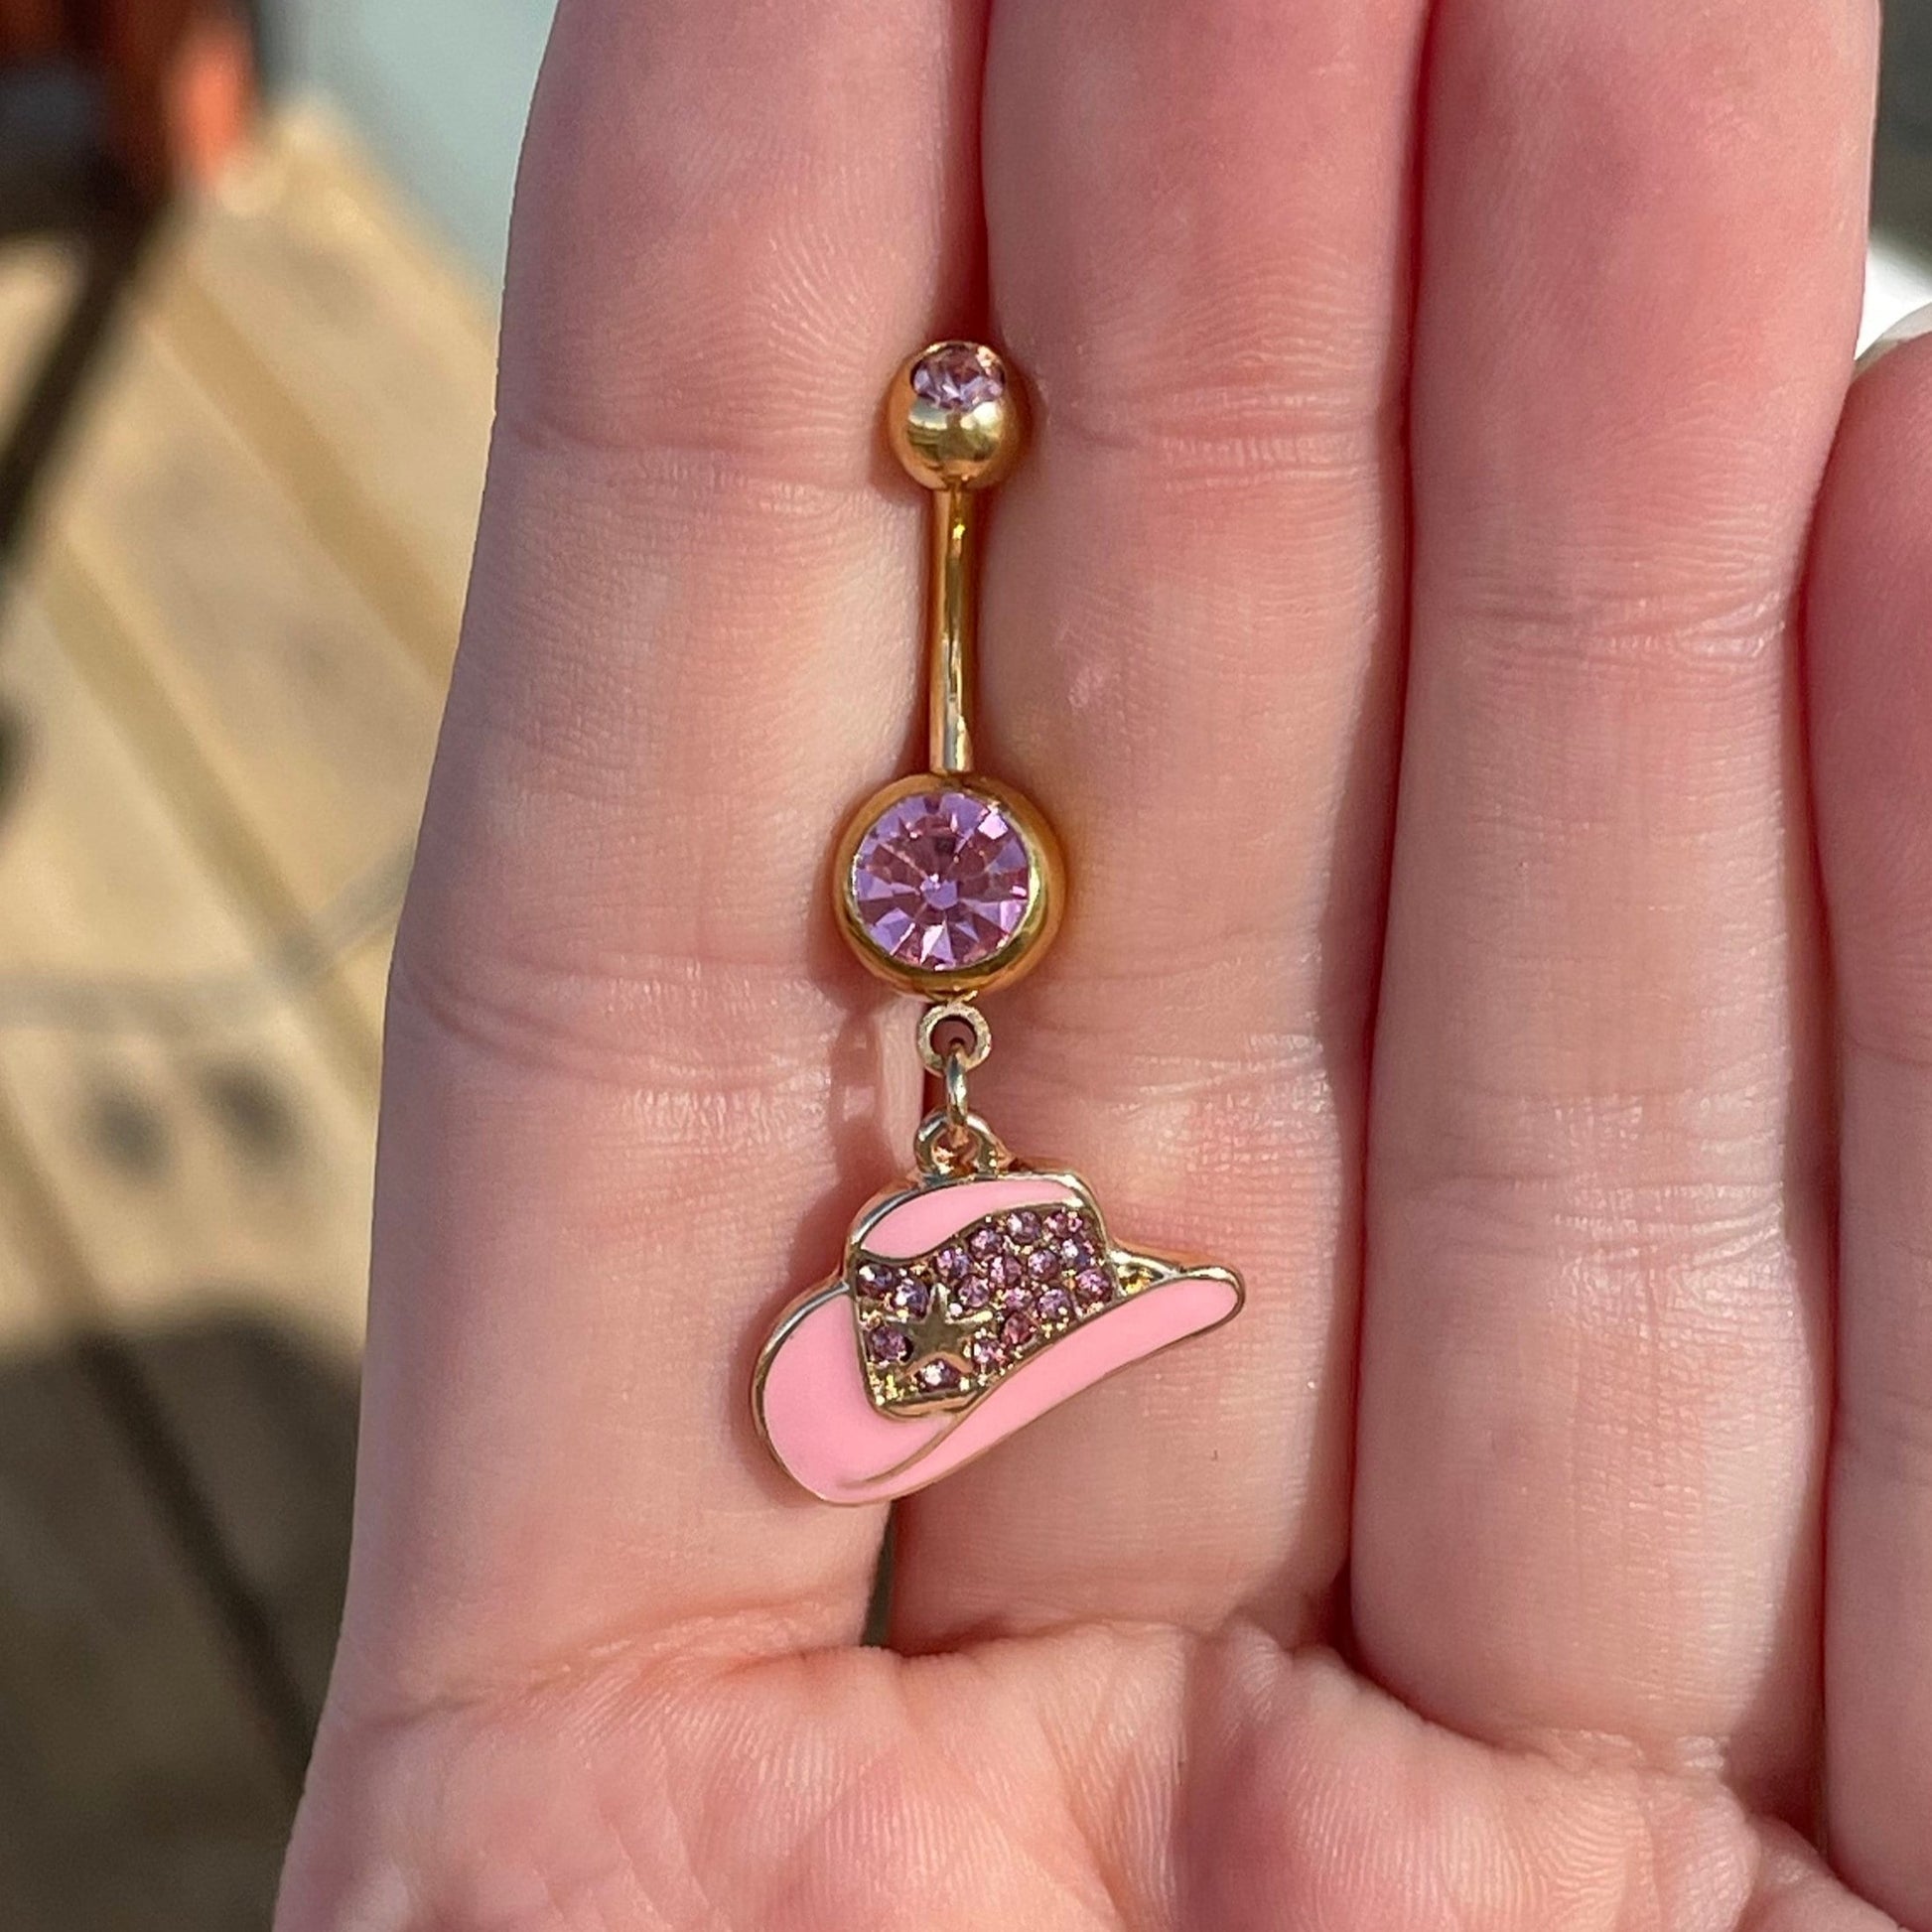 Cute Cowboy Hat Belly Button Ring (14G | 10mm | Surgical Steel | Gold & Pink or Silver & Blue)